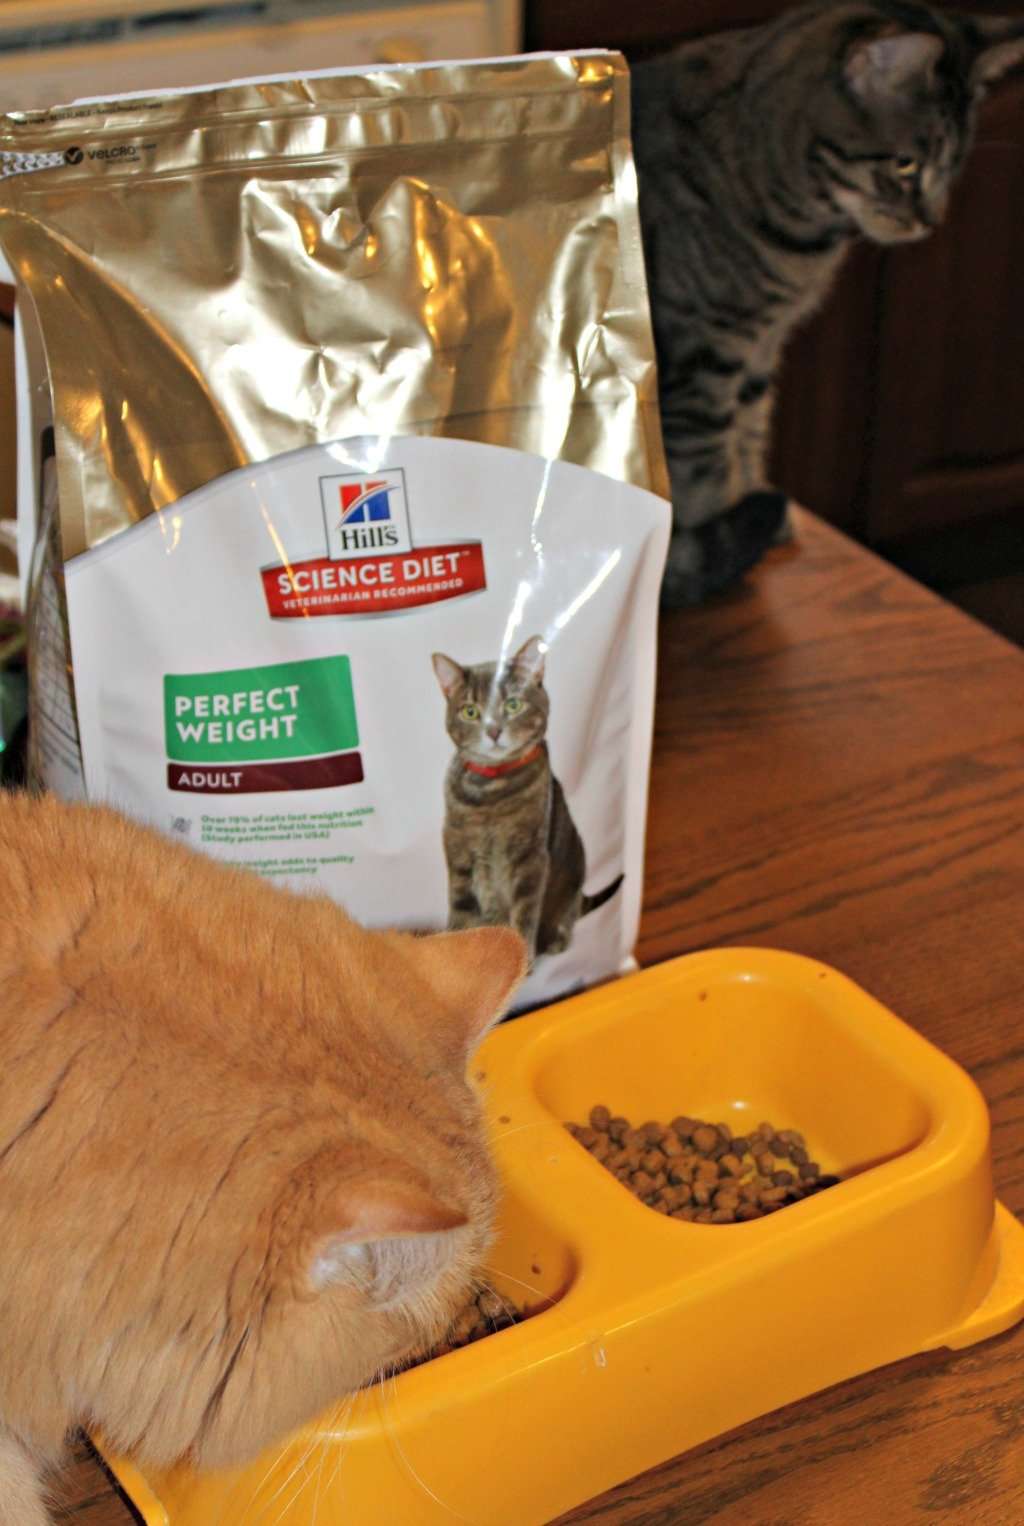 Hill's Happier Pets, Healthier Lives $100 Sweepstakes with 100 Winners!